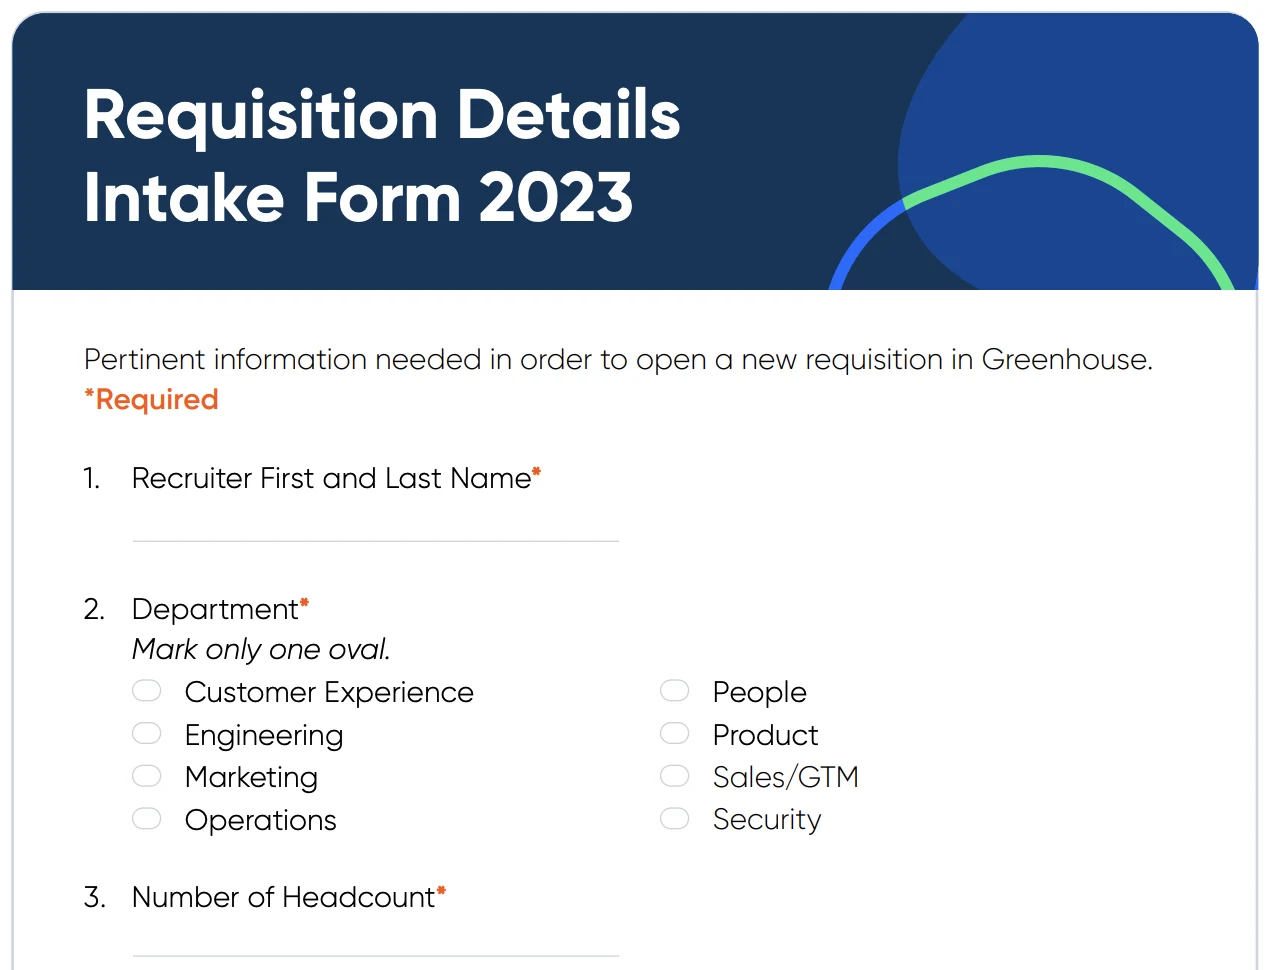 Screenshot of the top of a form titled "Requisition Details Intake Form 2023". Questions shown include recruiter name, department, and number of headcount.